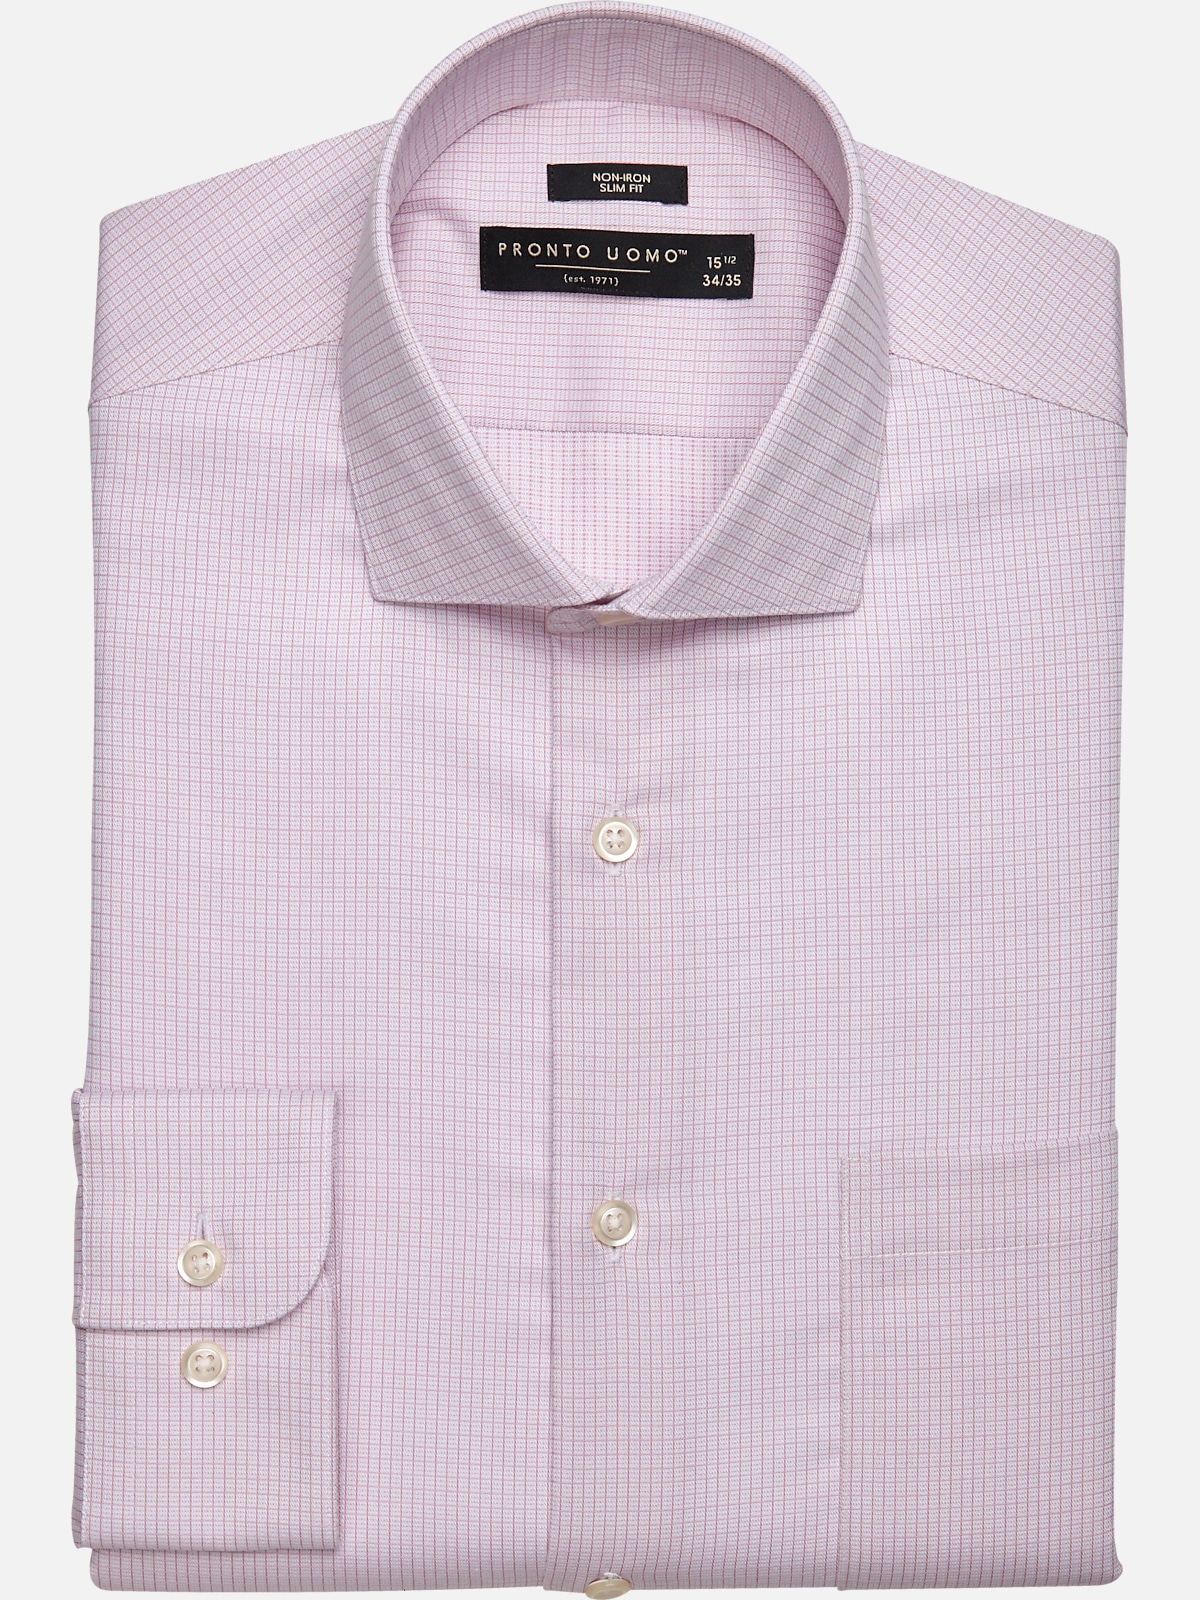 Pronto Uomo Slim Fit Check Dress Shirt | All Clearance $39.99| Men's ...